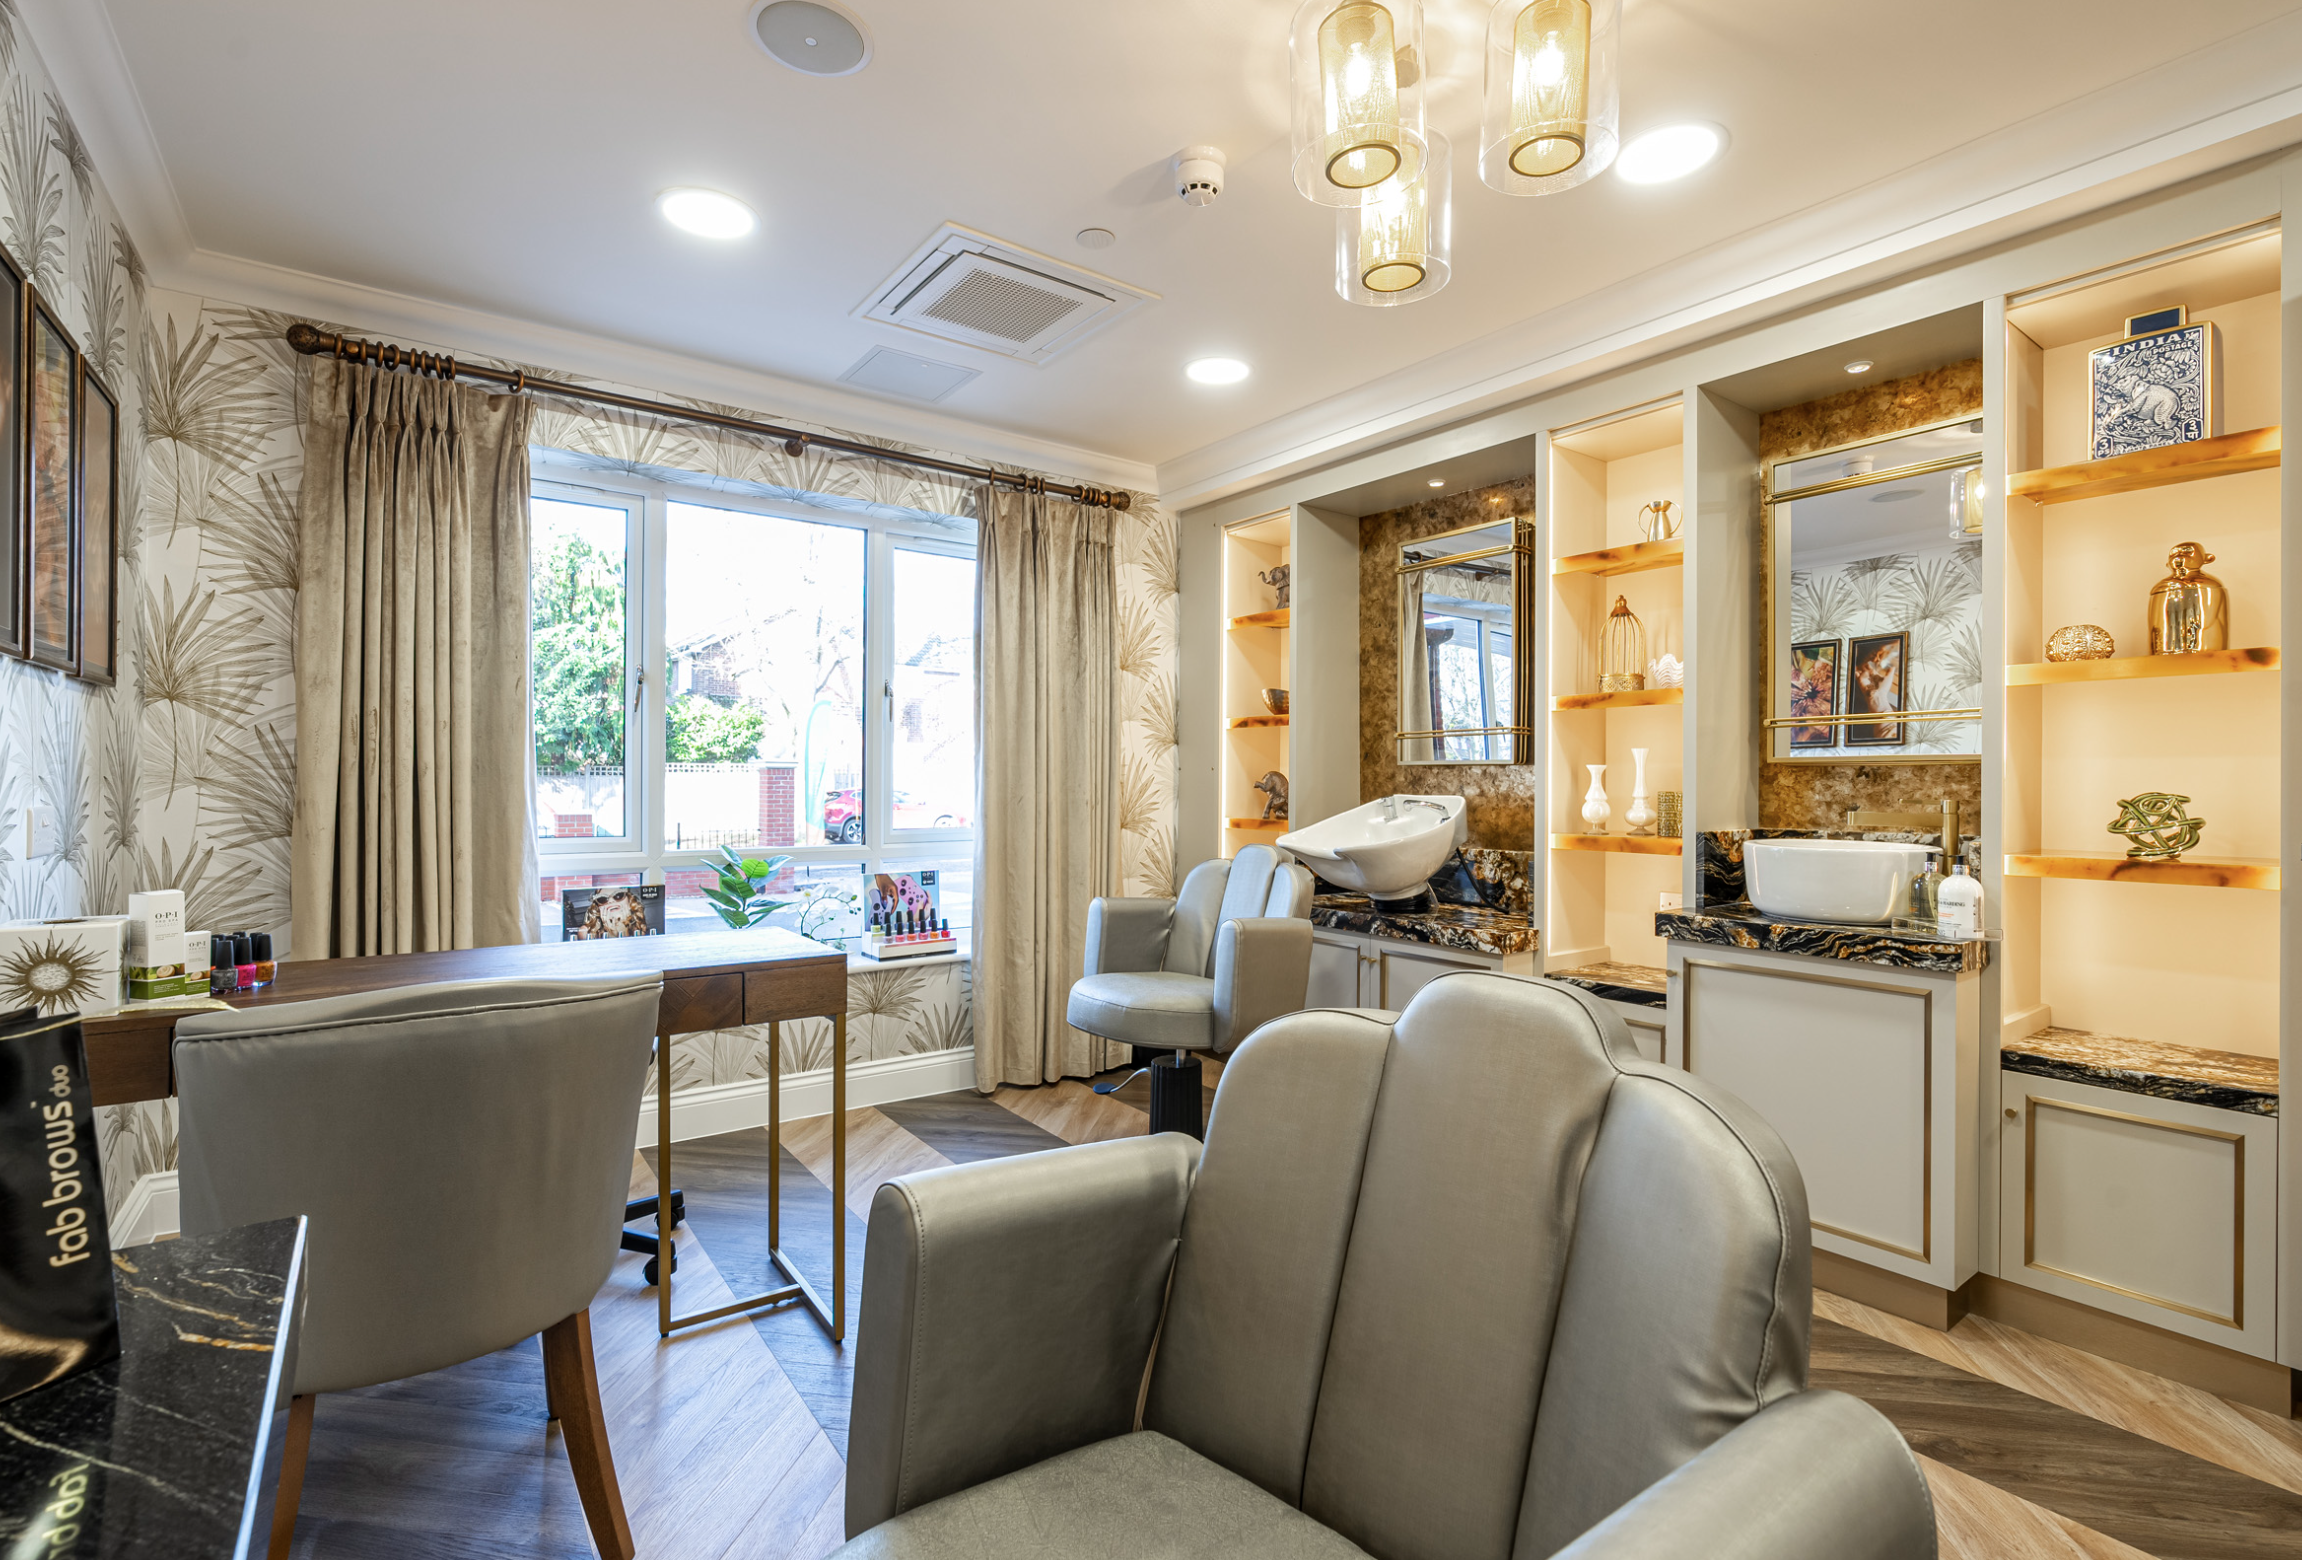 Salon of Kailash Manor care home in Pinner, London